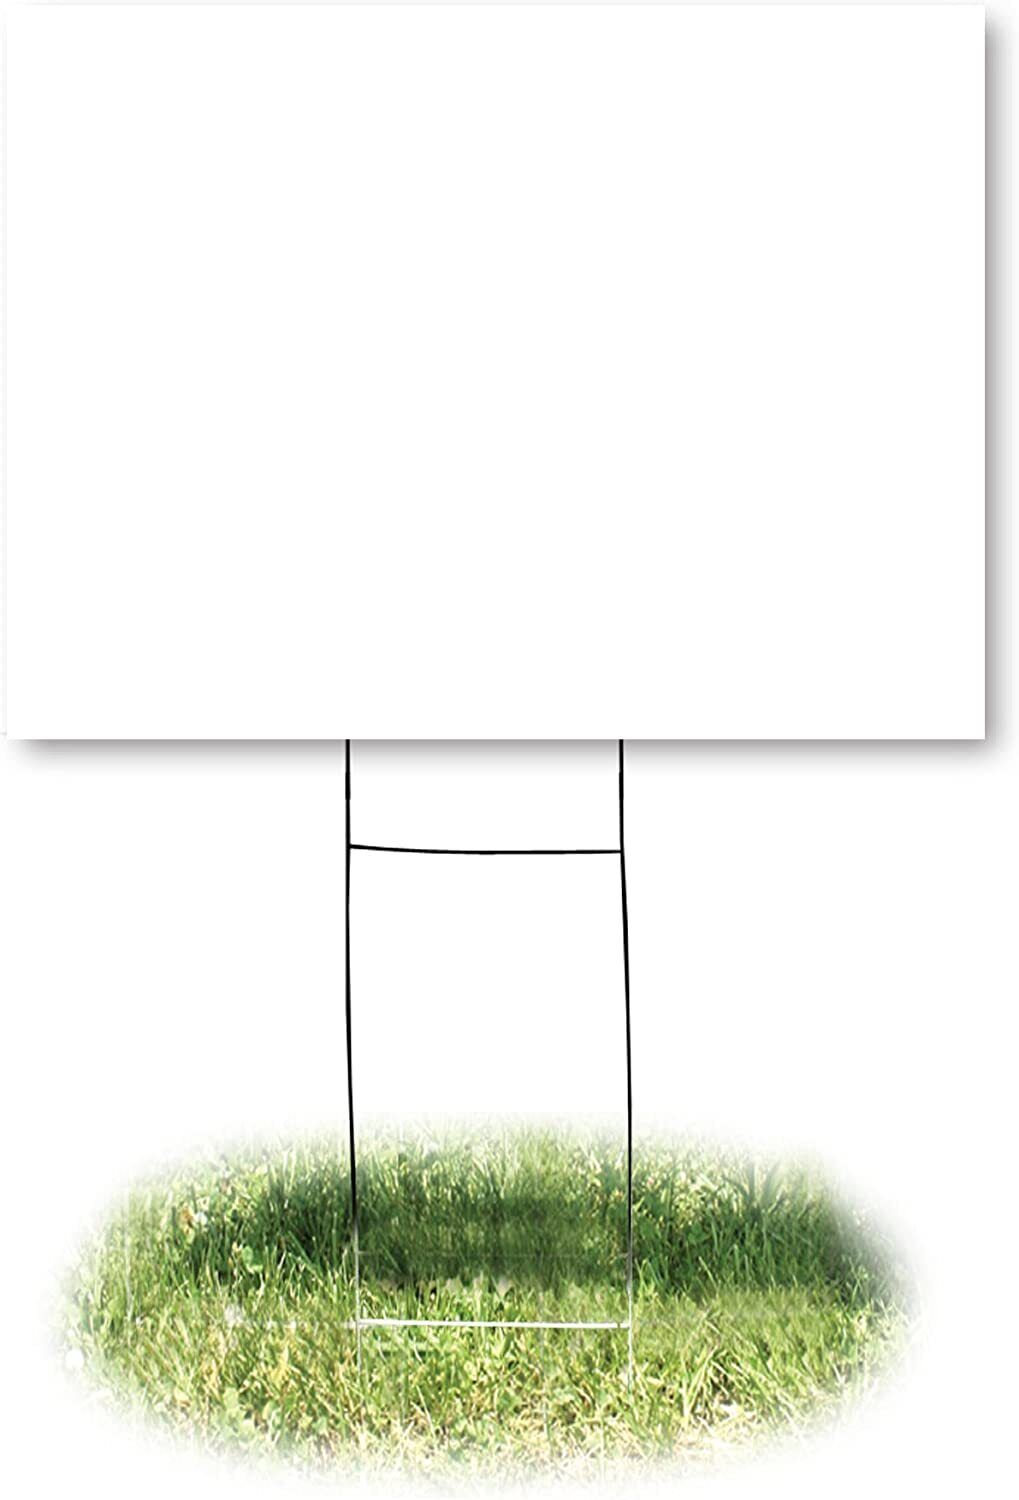 18x24 Durable Blank Yard Sign Kit (3,5,10, 50, or 100) with 24